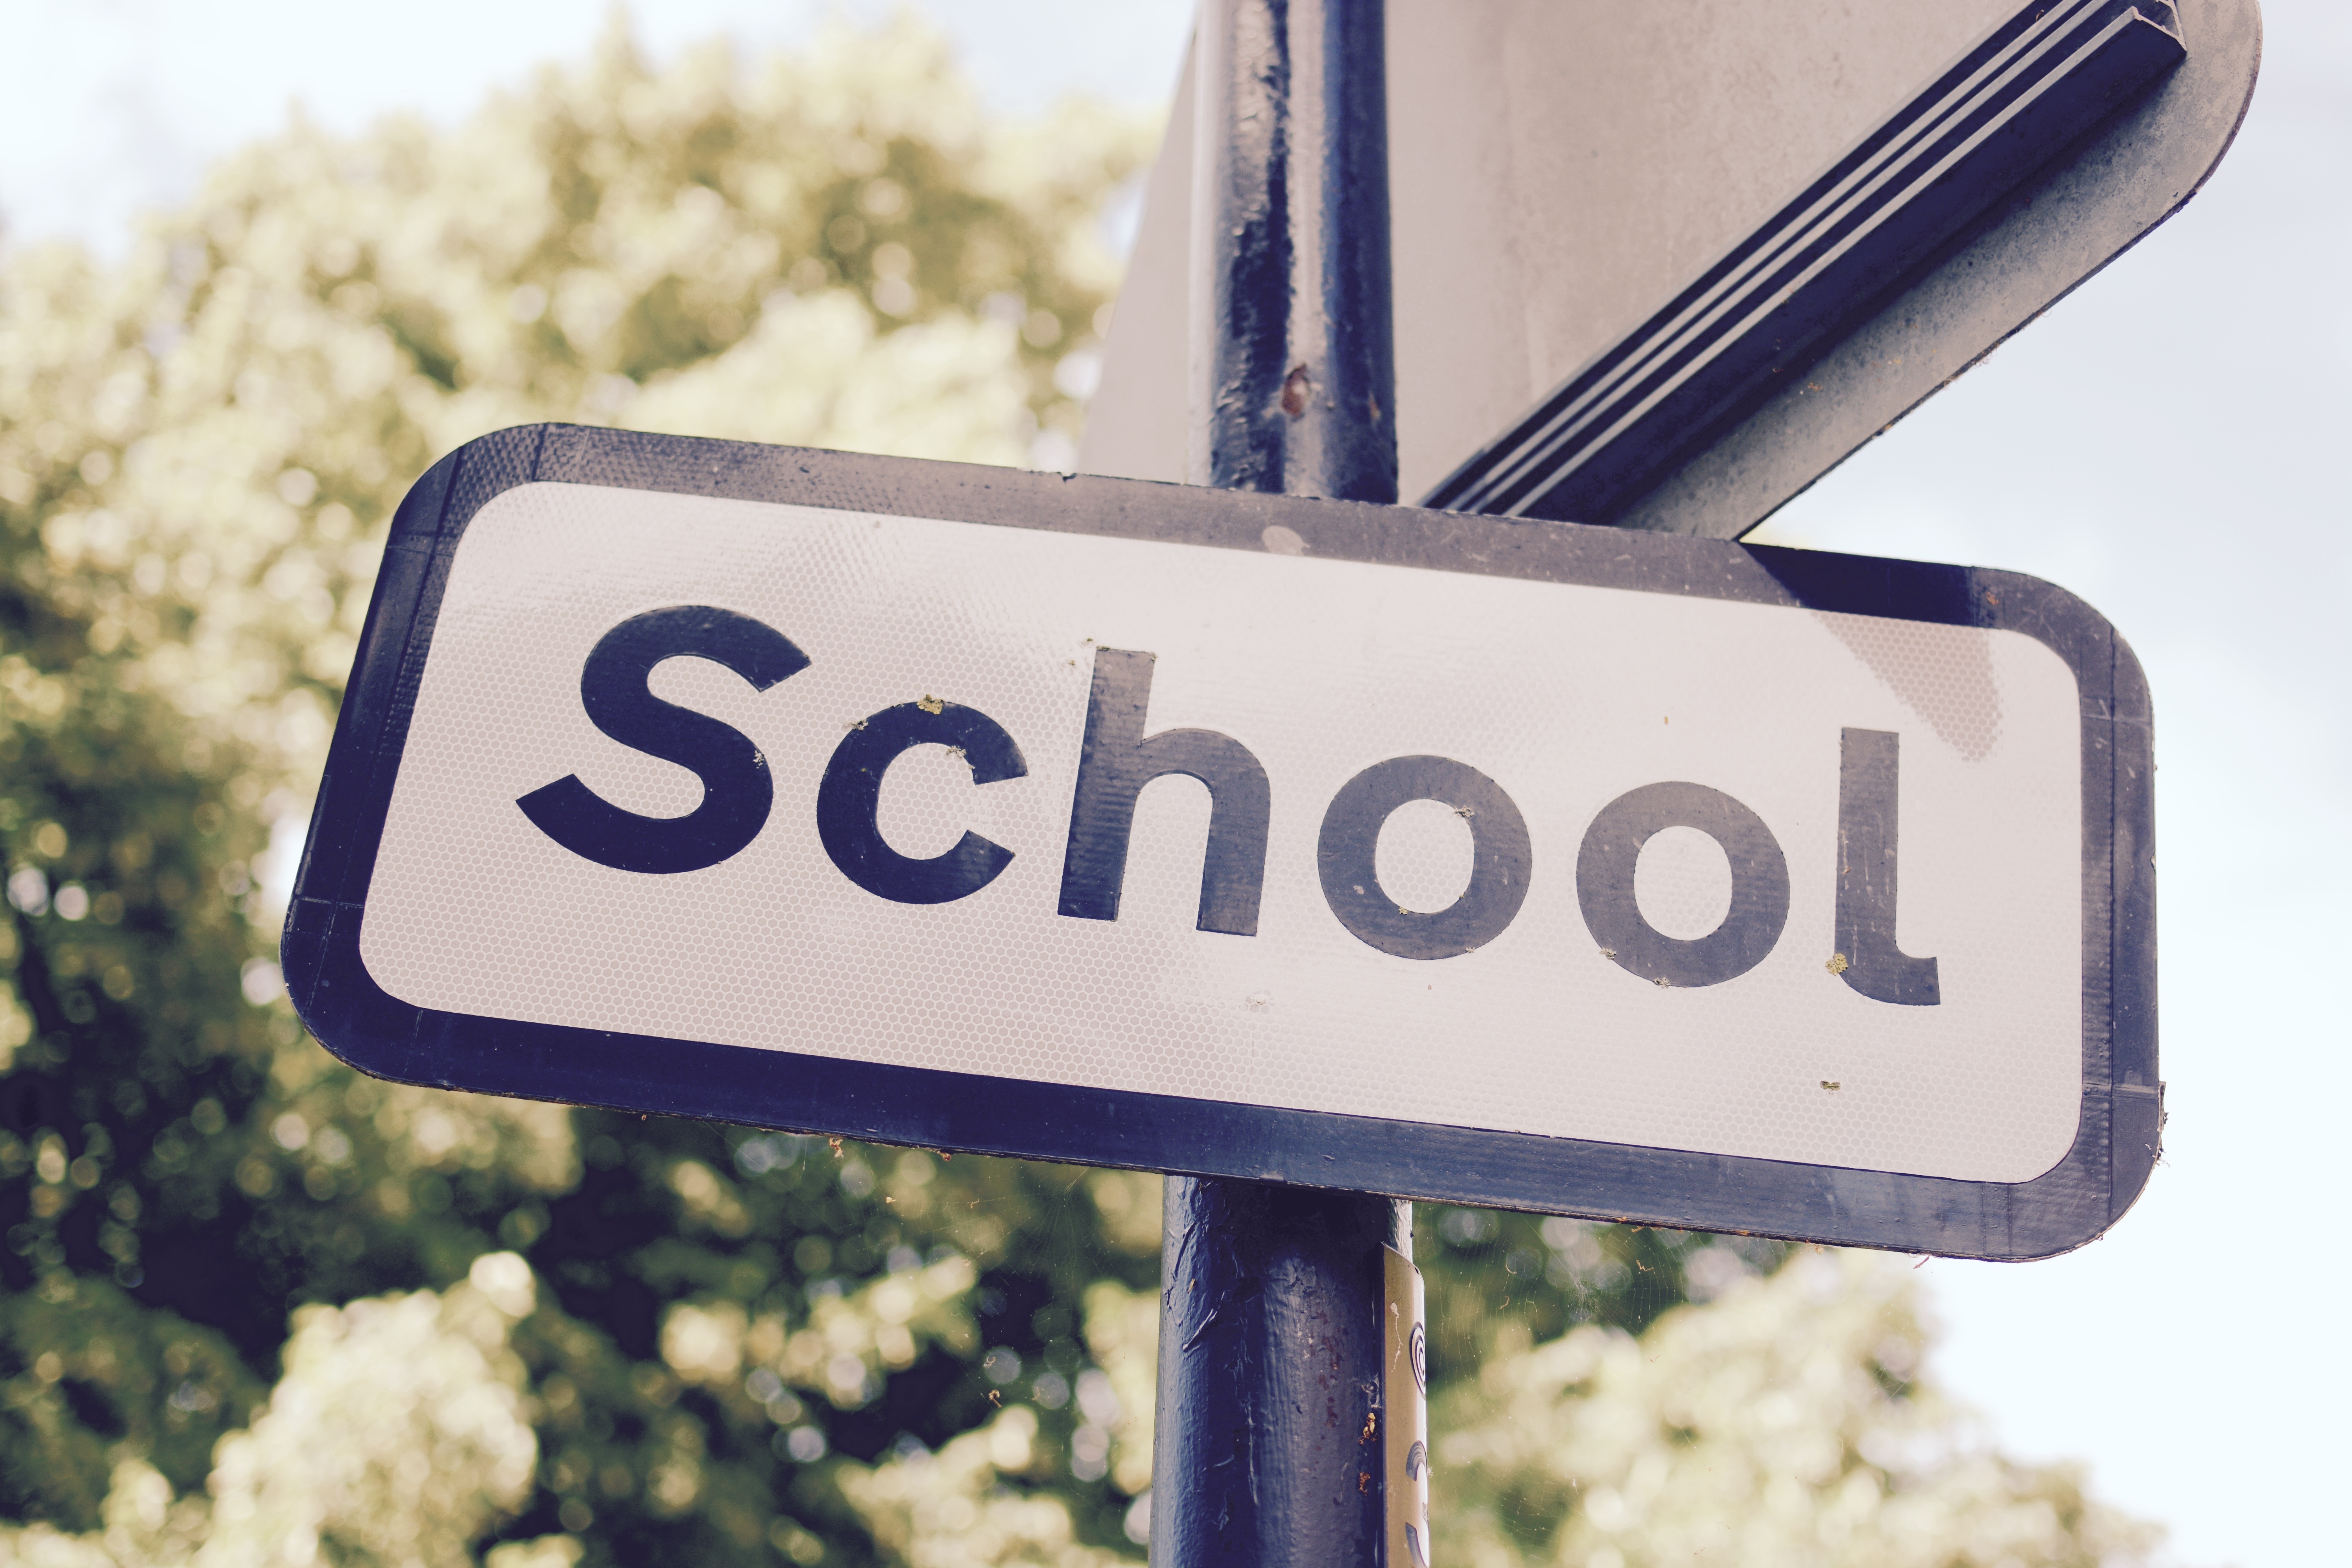 Image of sign reading 'School' on a lamp post with a blurred image of a tree behind it.